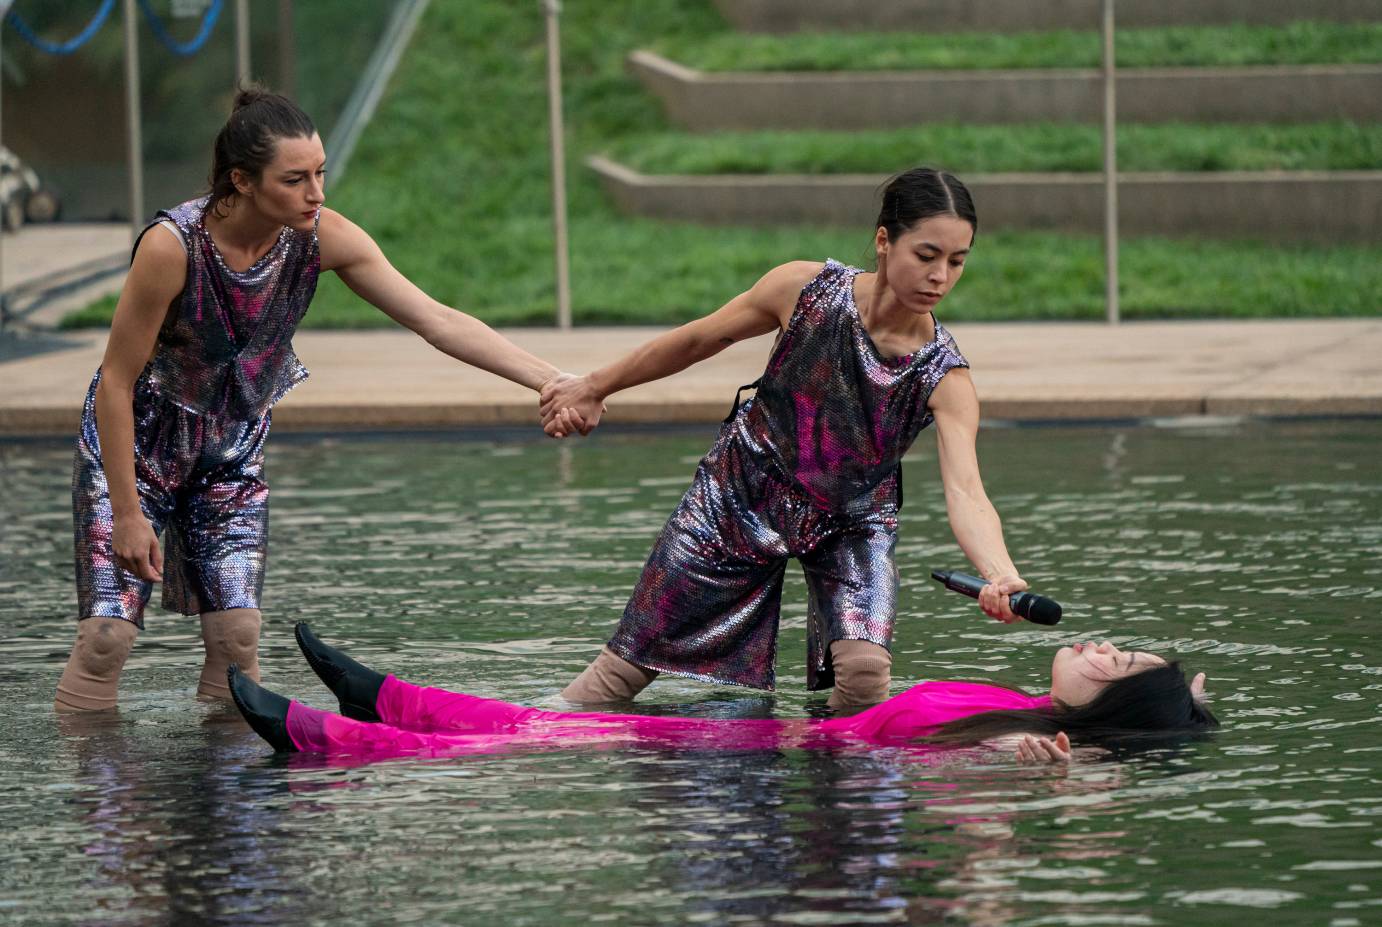 Jen Surigat lies in the pool, her black hair and fuchsia dress streaming around her as two dancers offer assistance.